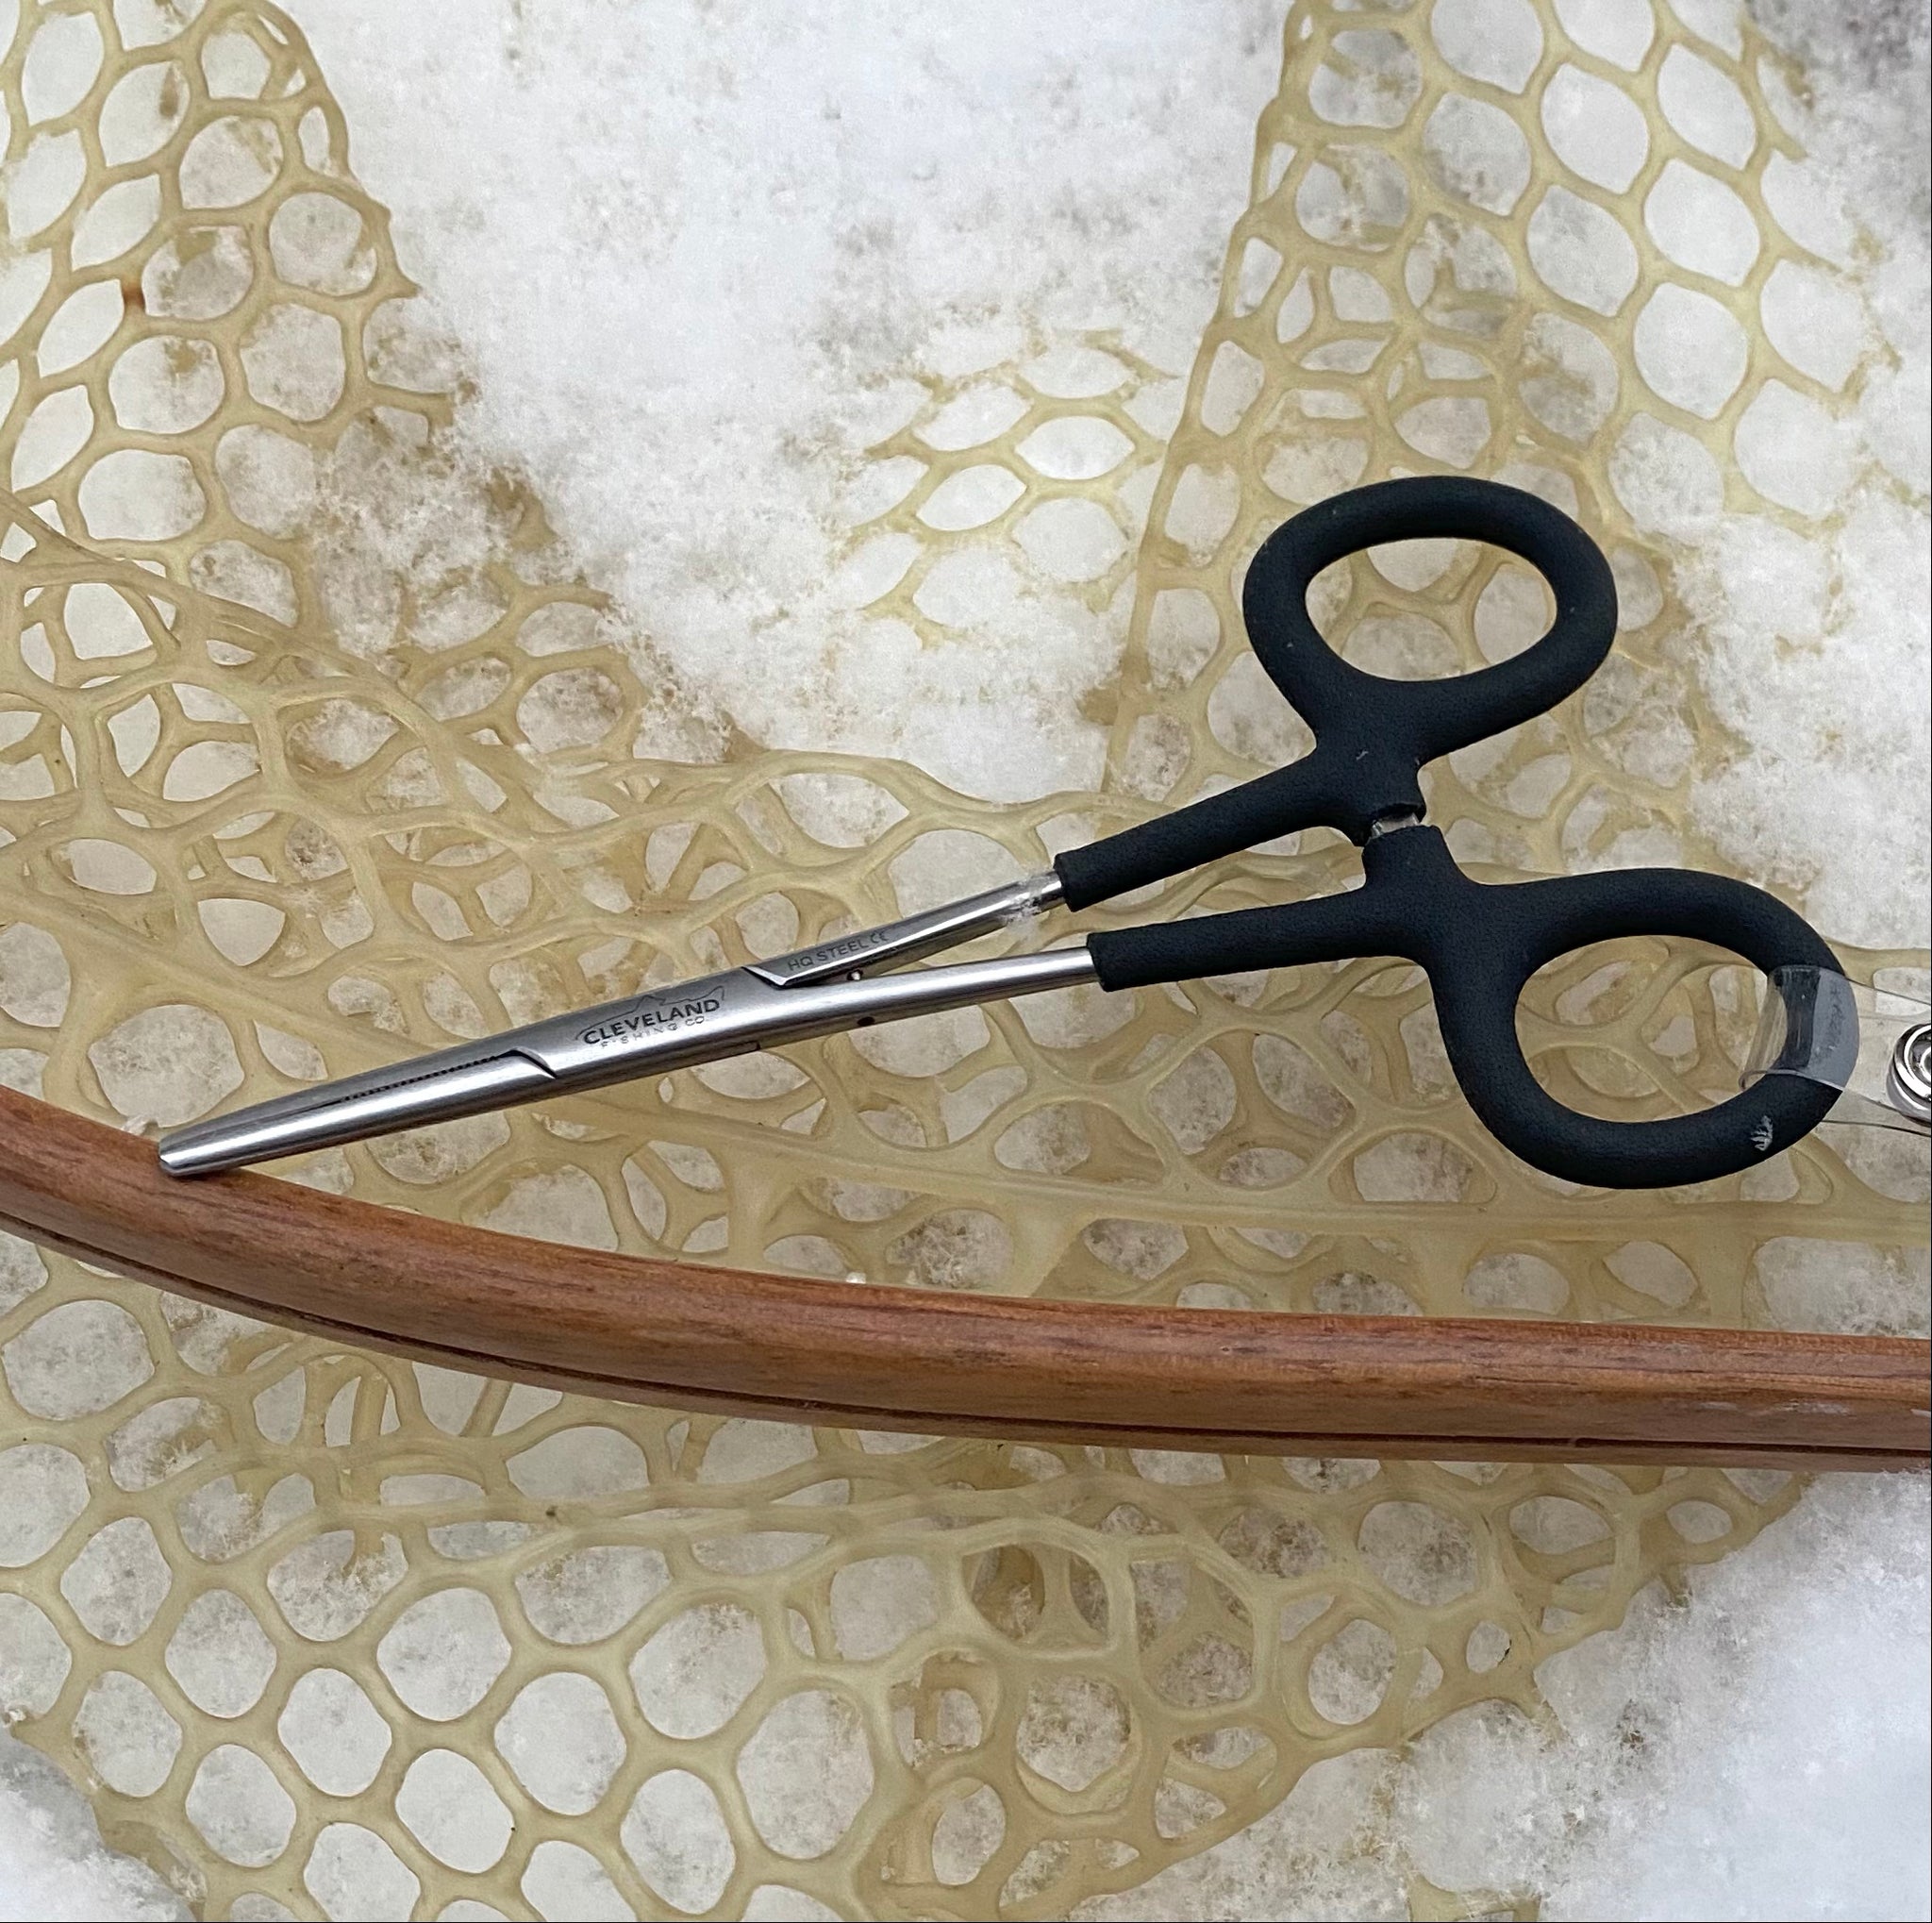 Forceps - Pliers - Grips – Cleveland Fishing Co.